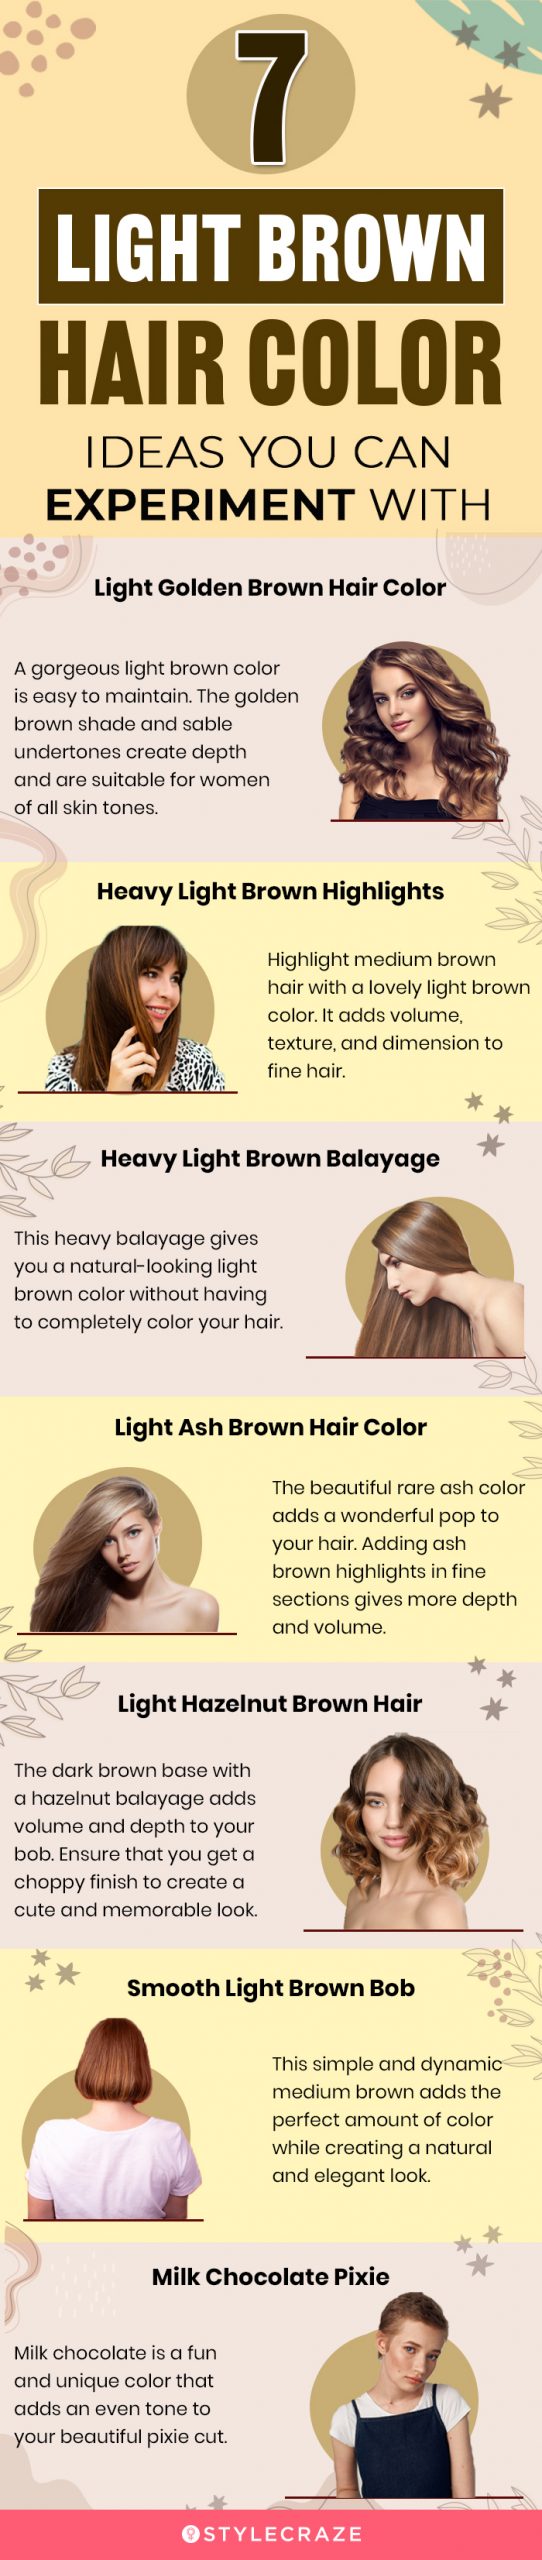 7 light brown hair color ideas you can experiment with (infographic)